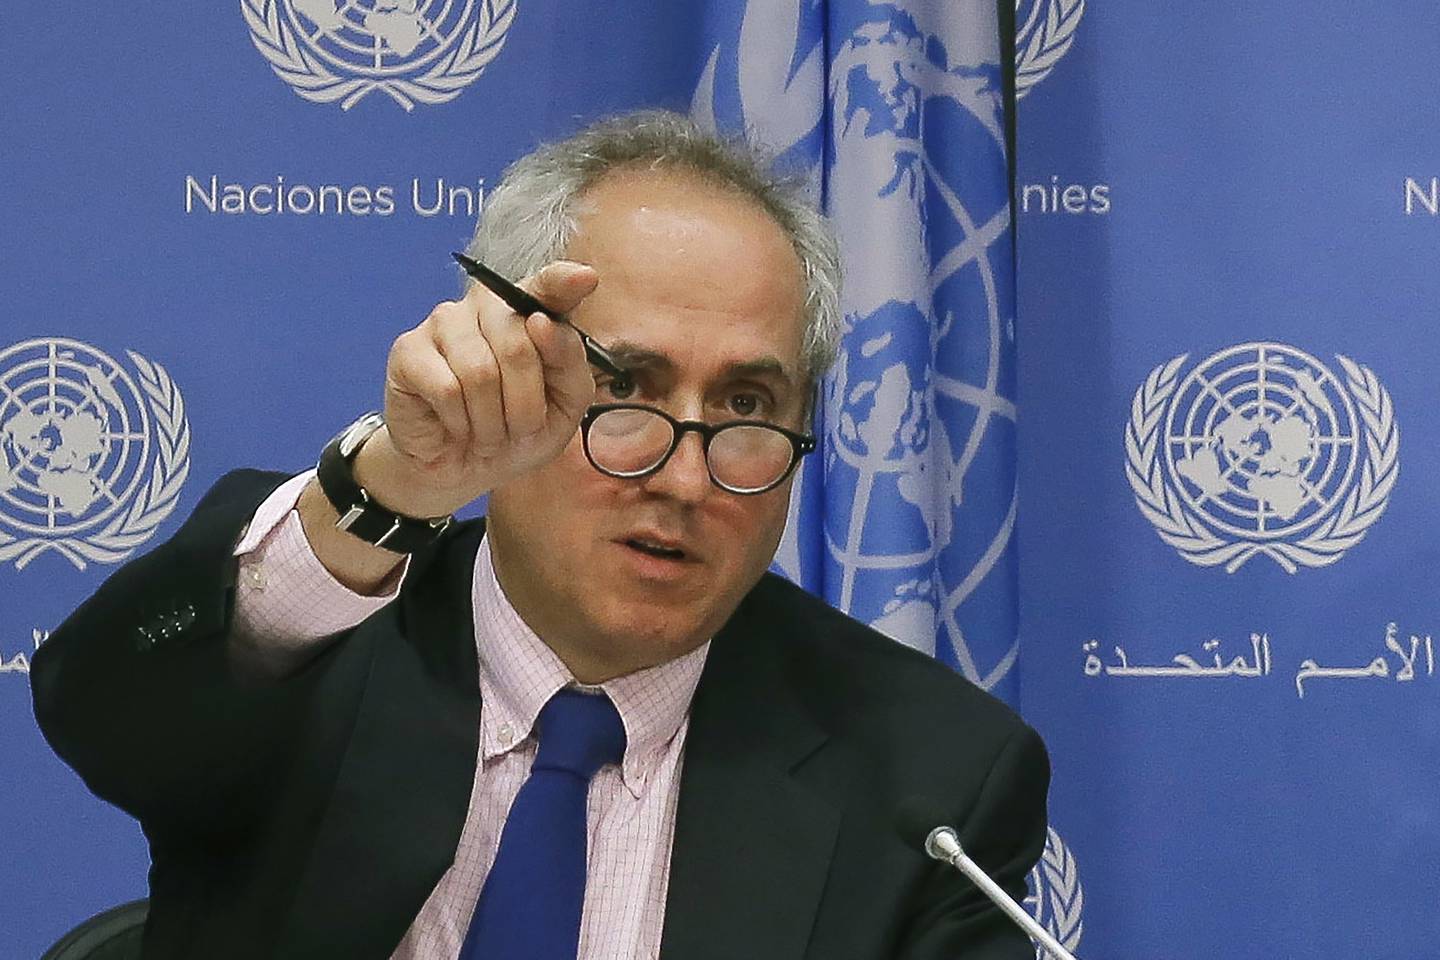 UN spokesman Stephane Dujarric said there had been 'positive indications from the parties' on a truce renewal. AP